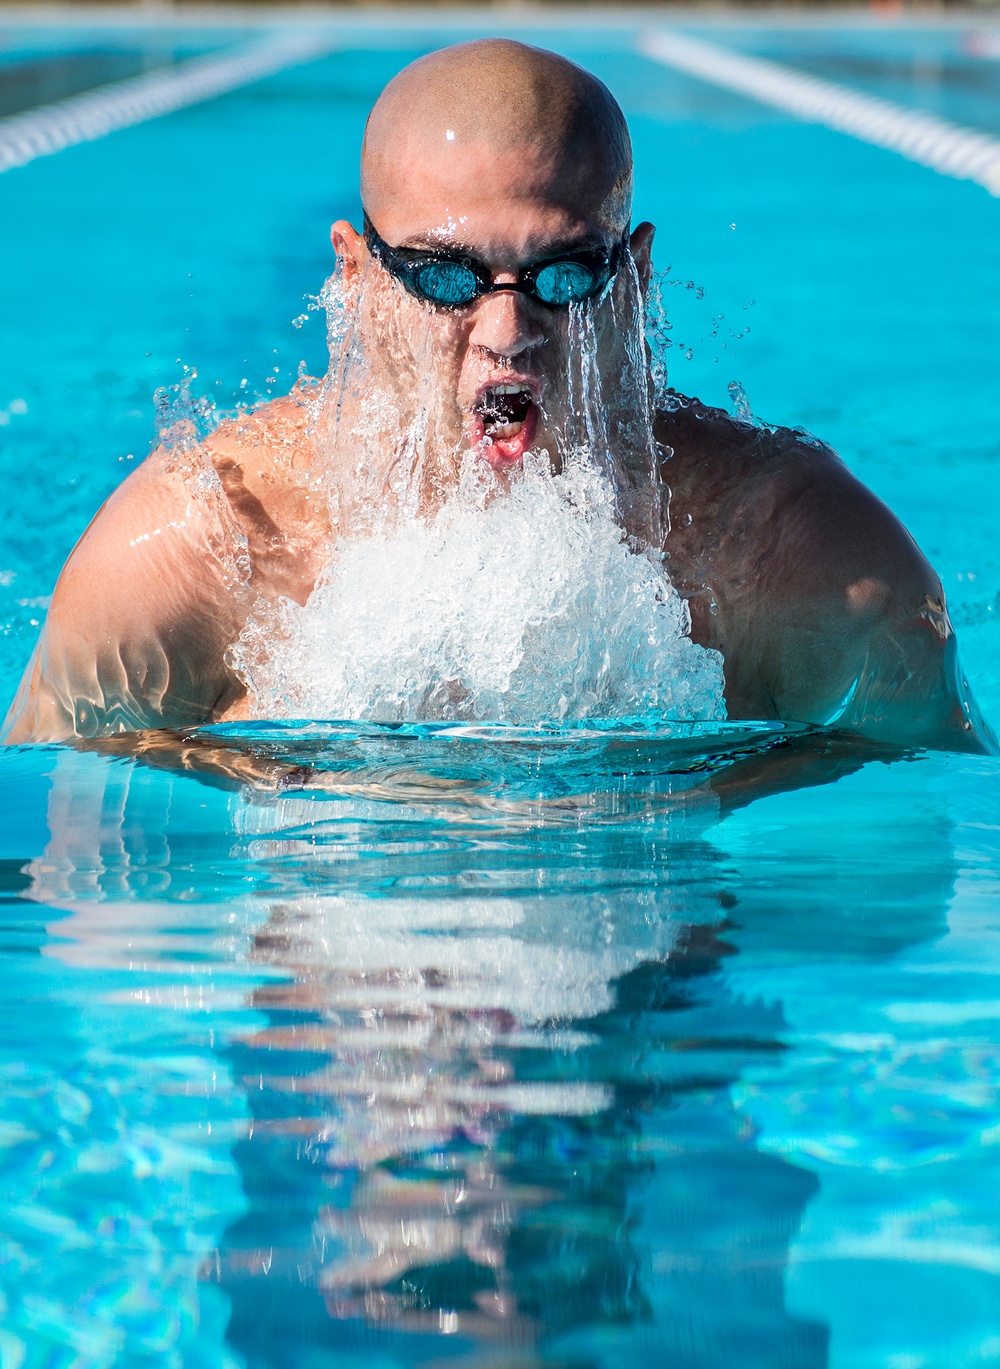 Airman swims into hall of fame